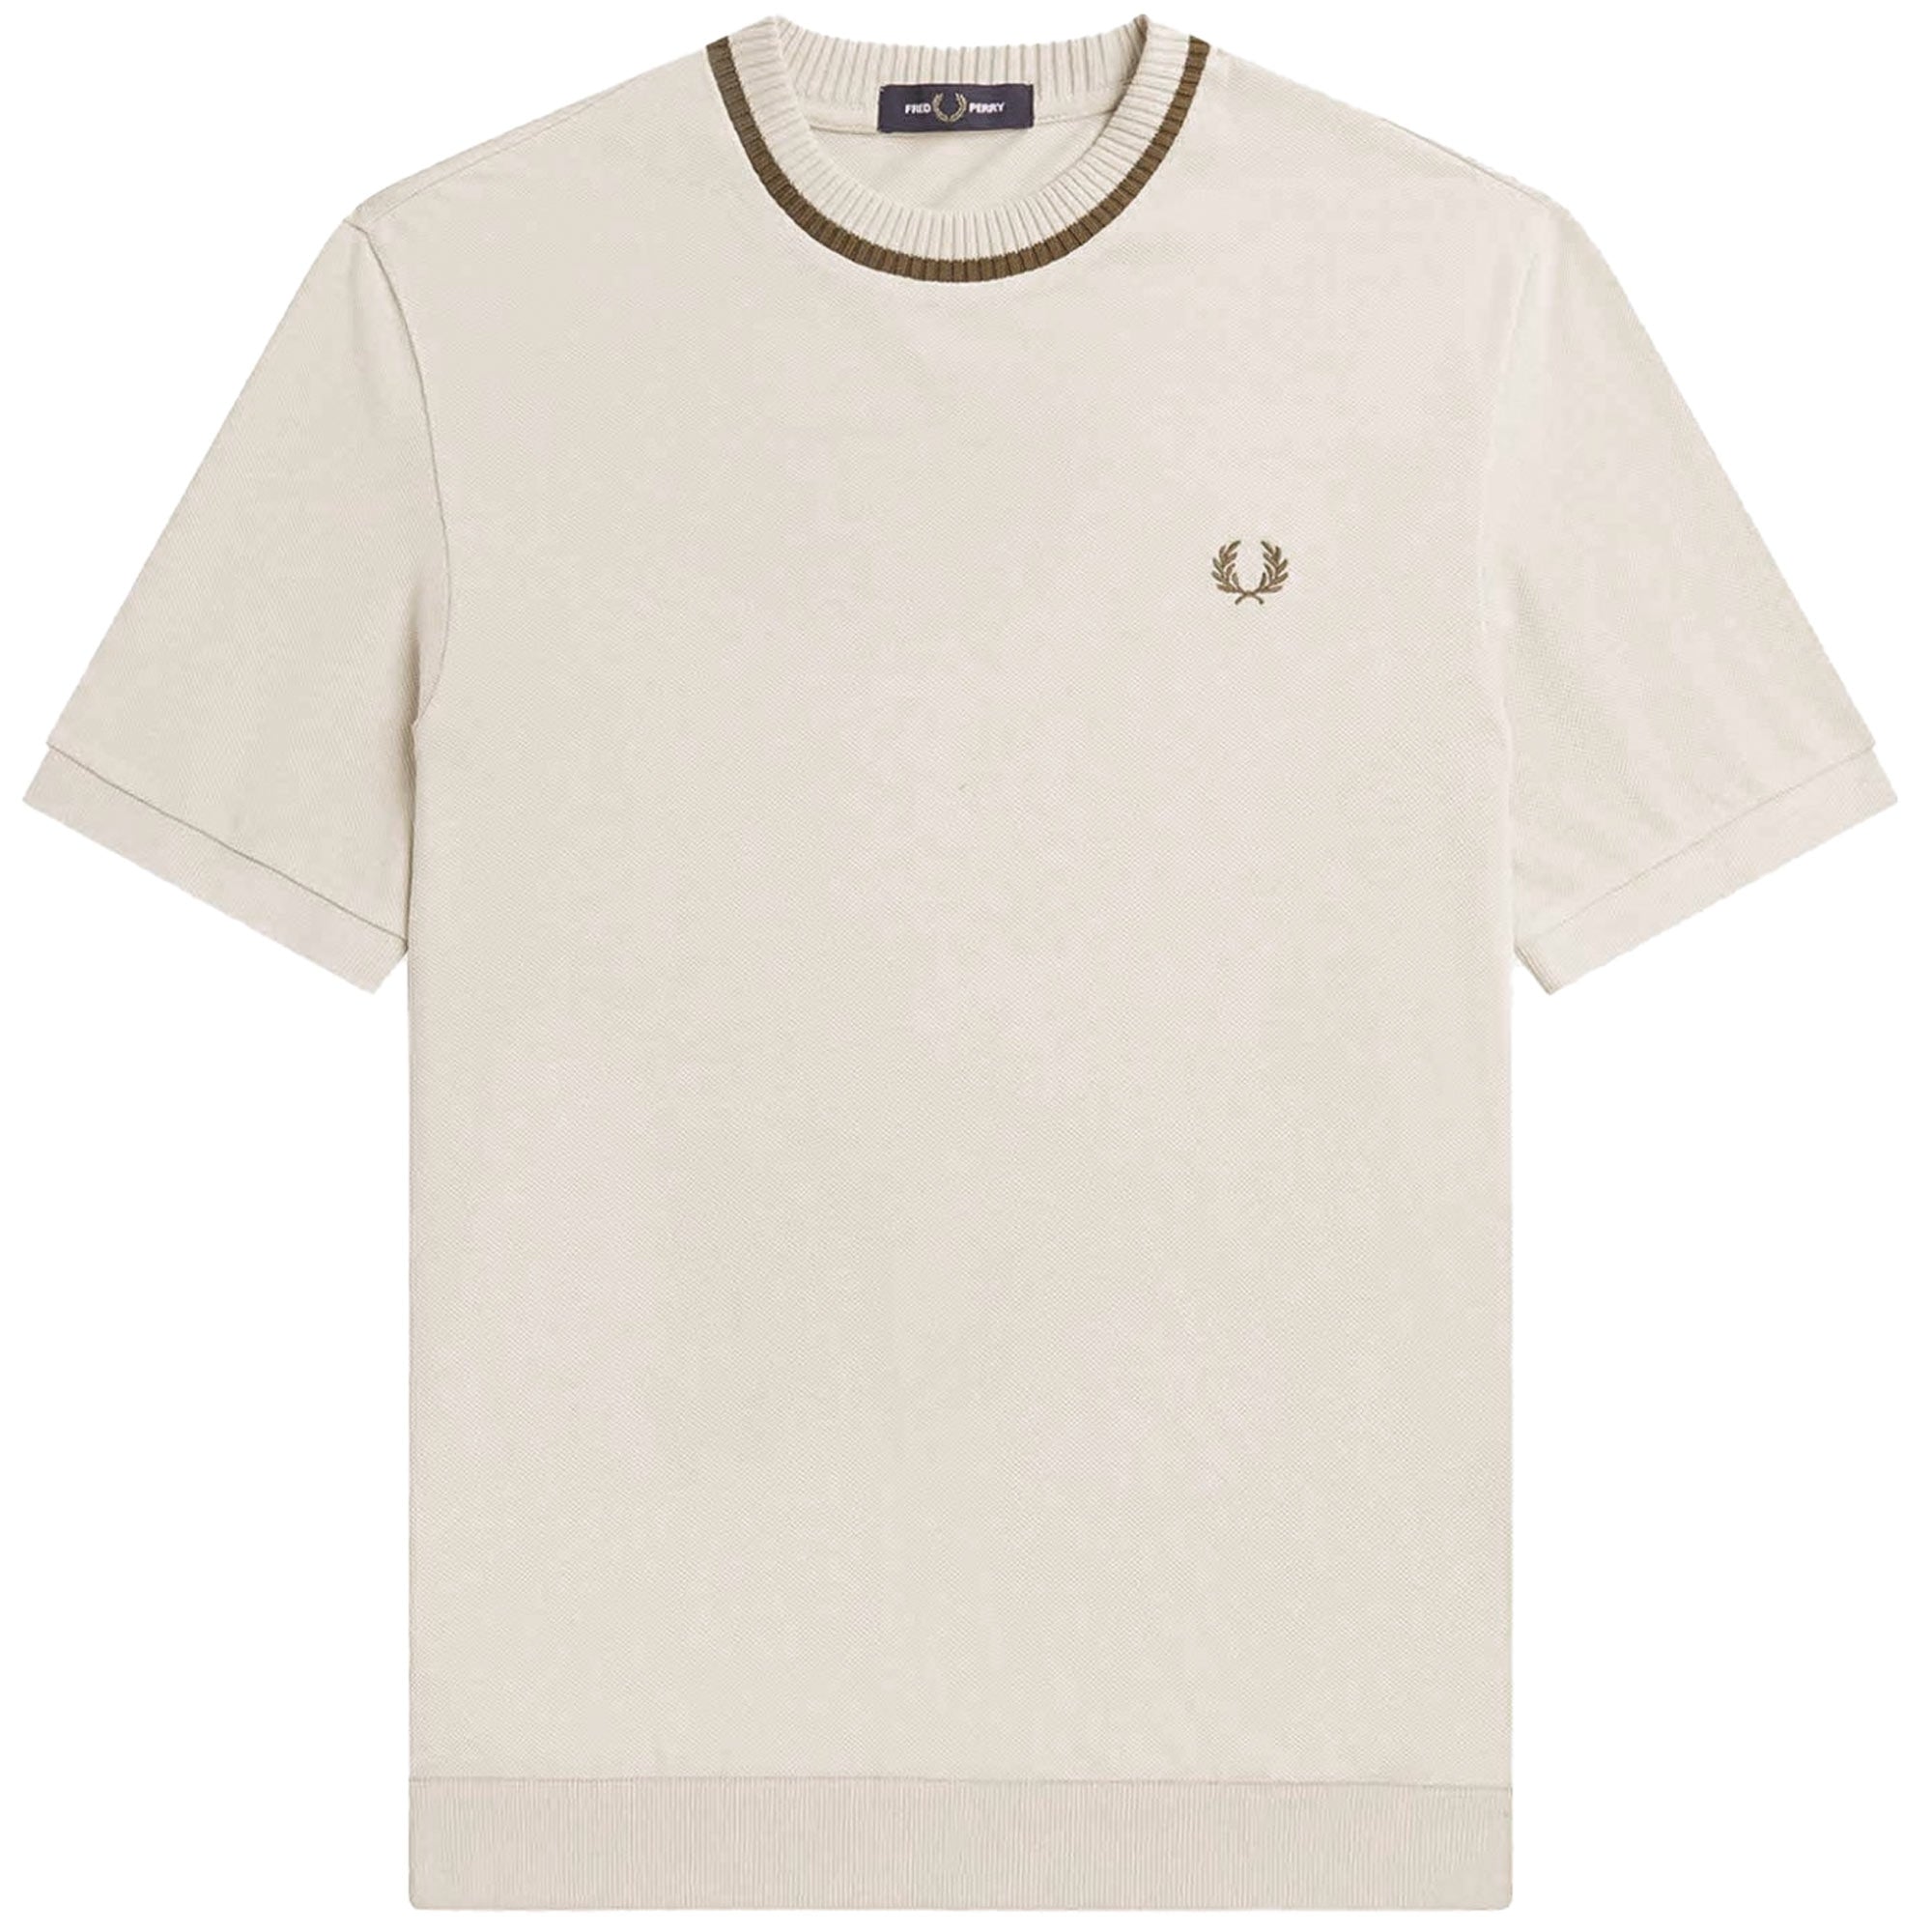 Fred Perry Crew Neck Pique T-Shirt - Snow White